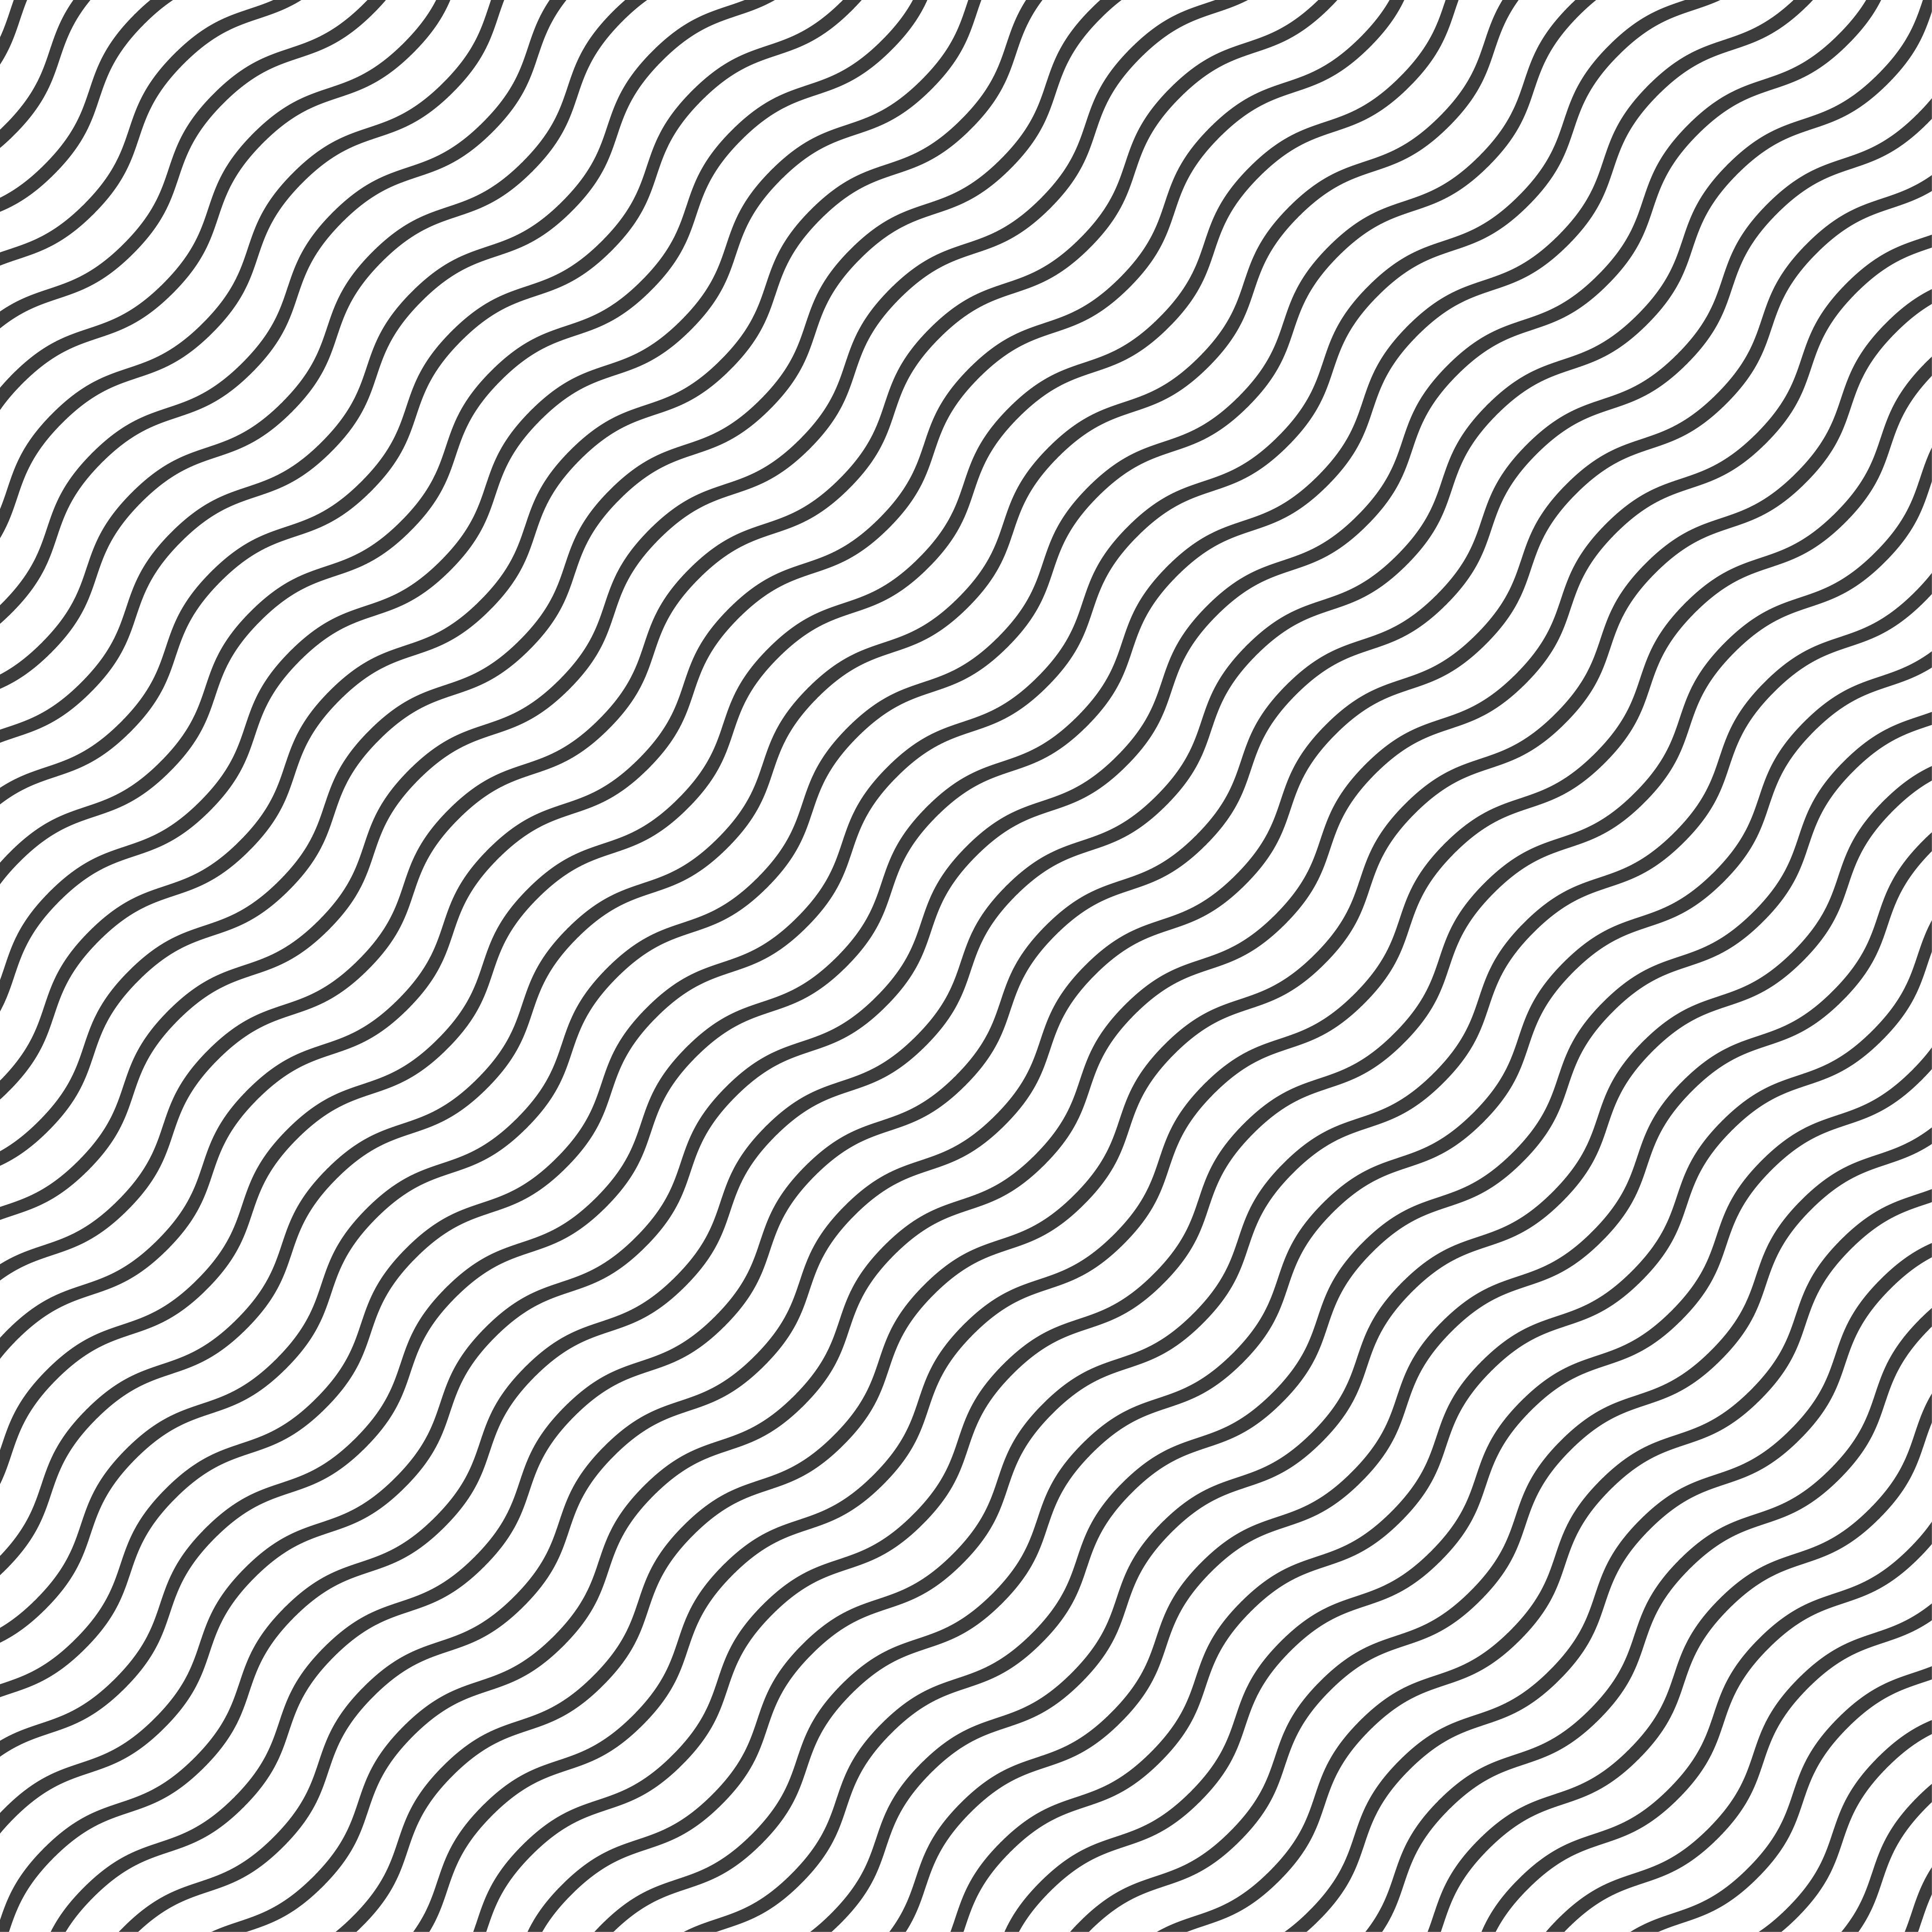 Background with wavy black. Lines wallpaper, Black and white wallpaper, Graphic design print